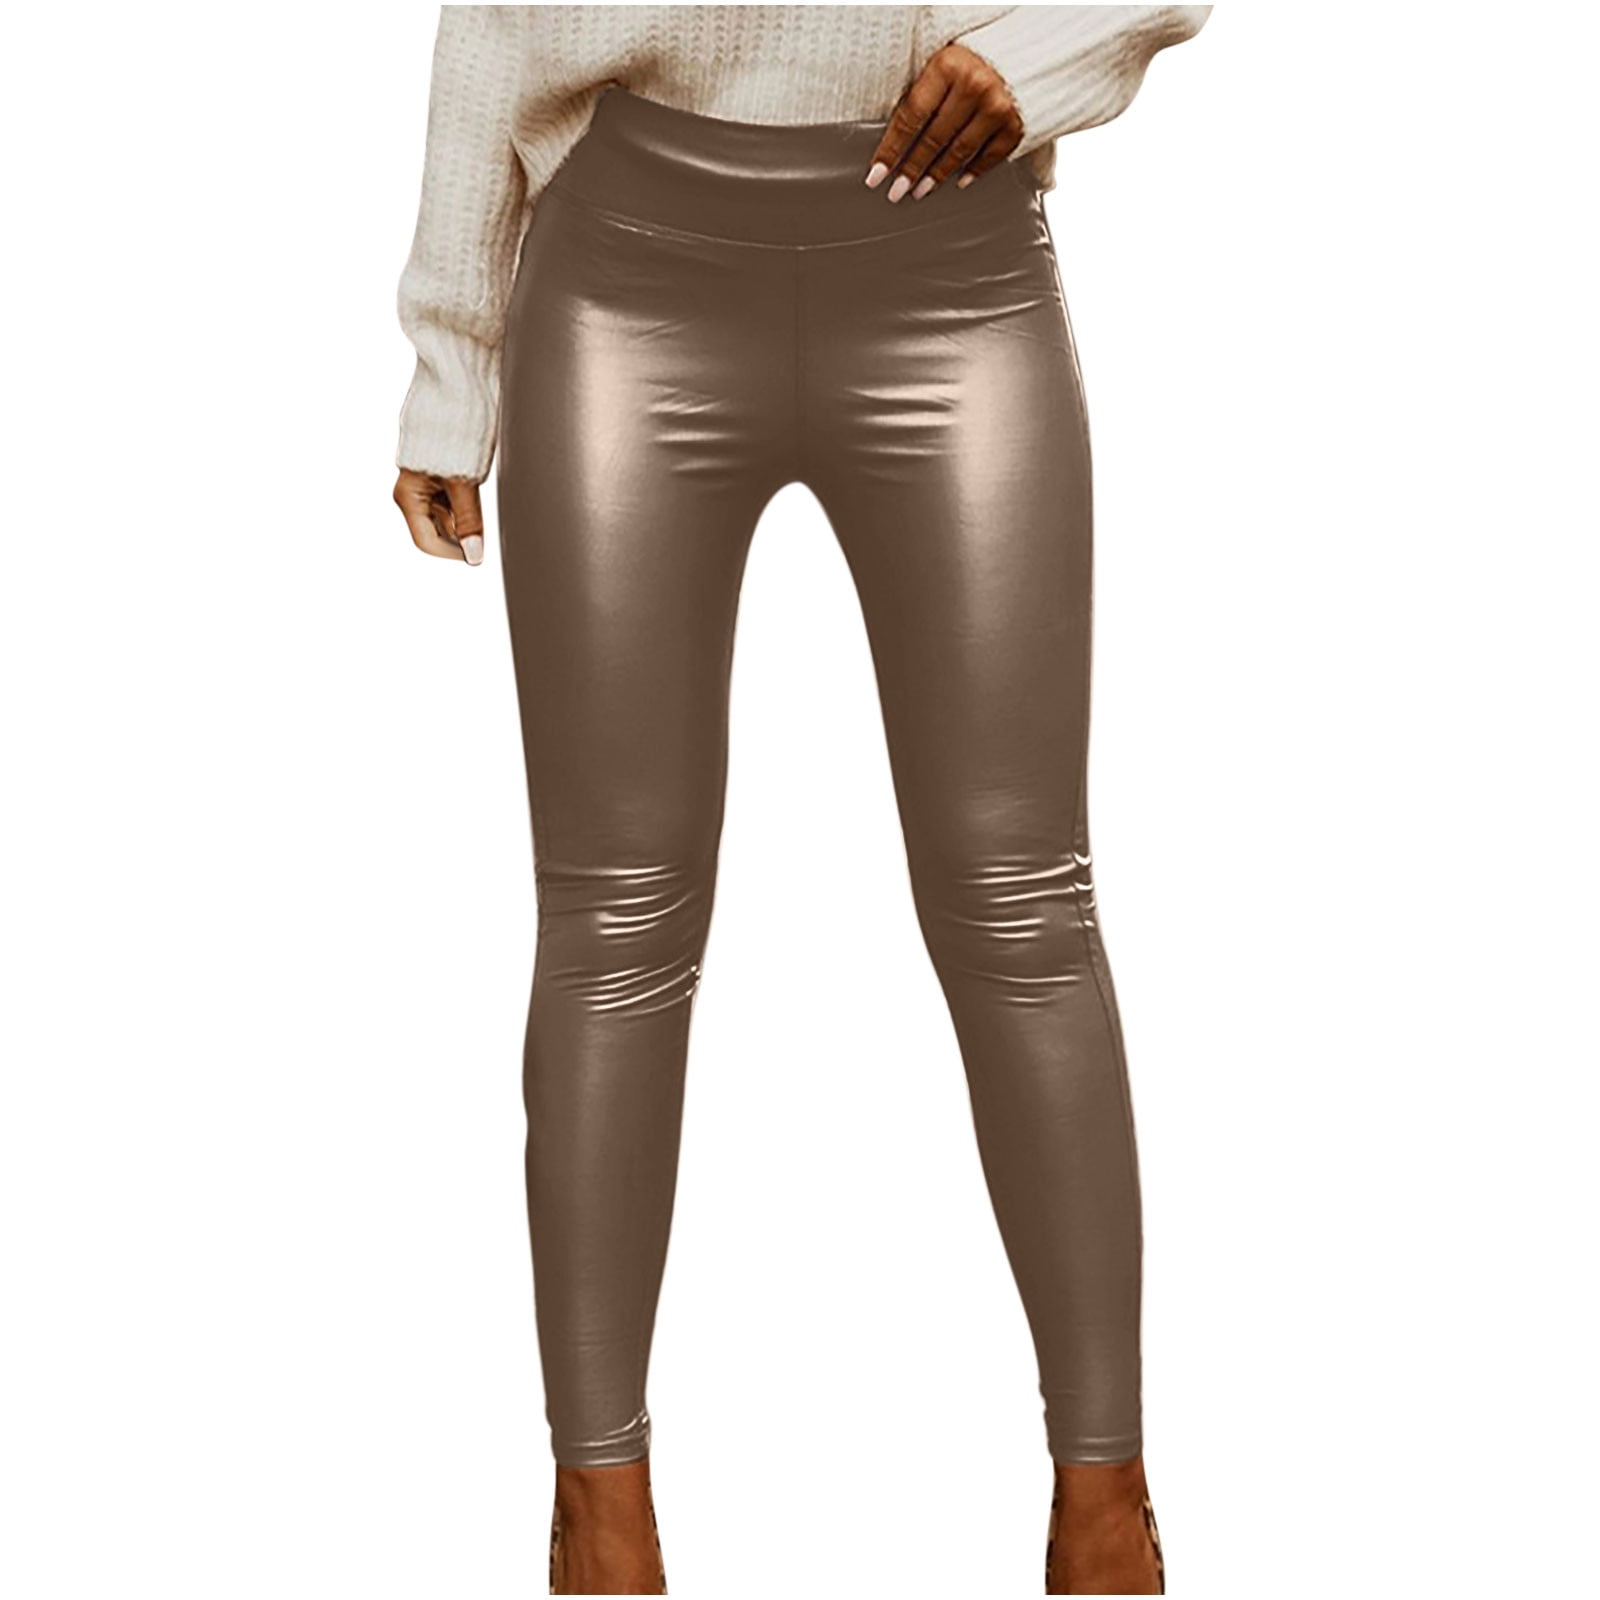 Women's Leather Leggings Pants High Waisted Butt Lifting Strechy SlimTights  Shaping Hip Push Up Sexy Pants 